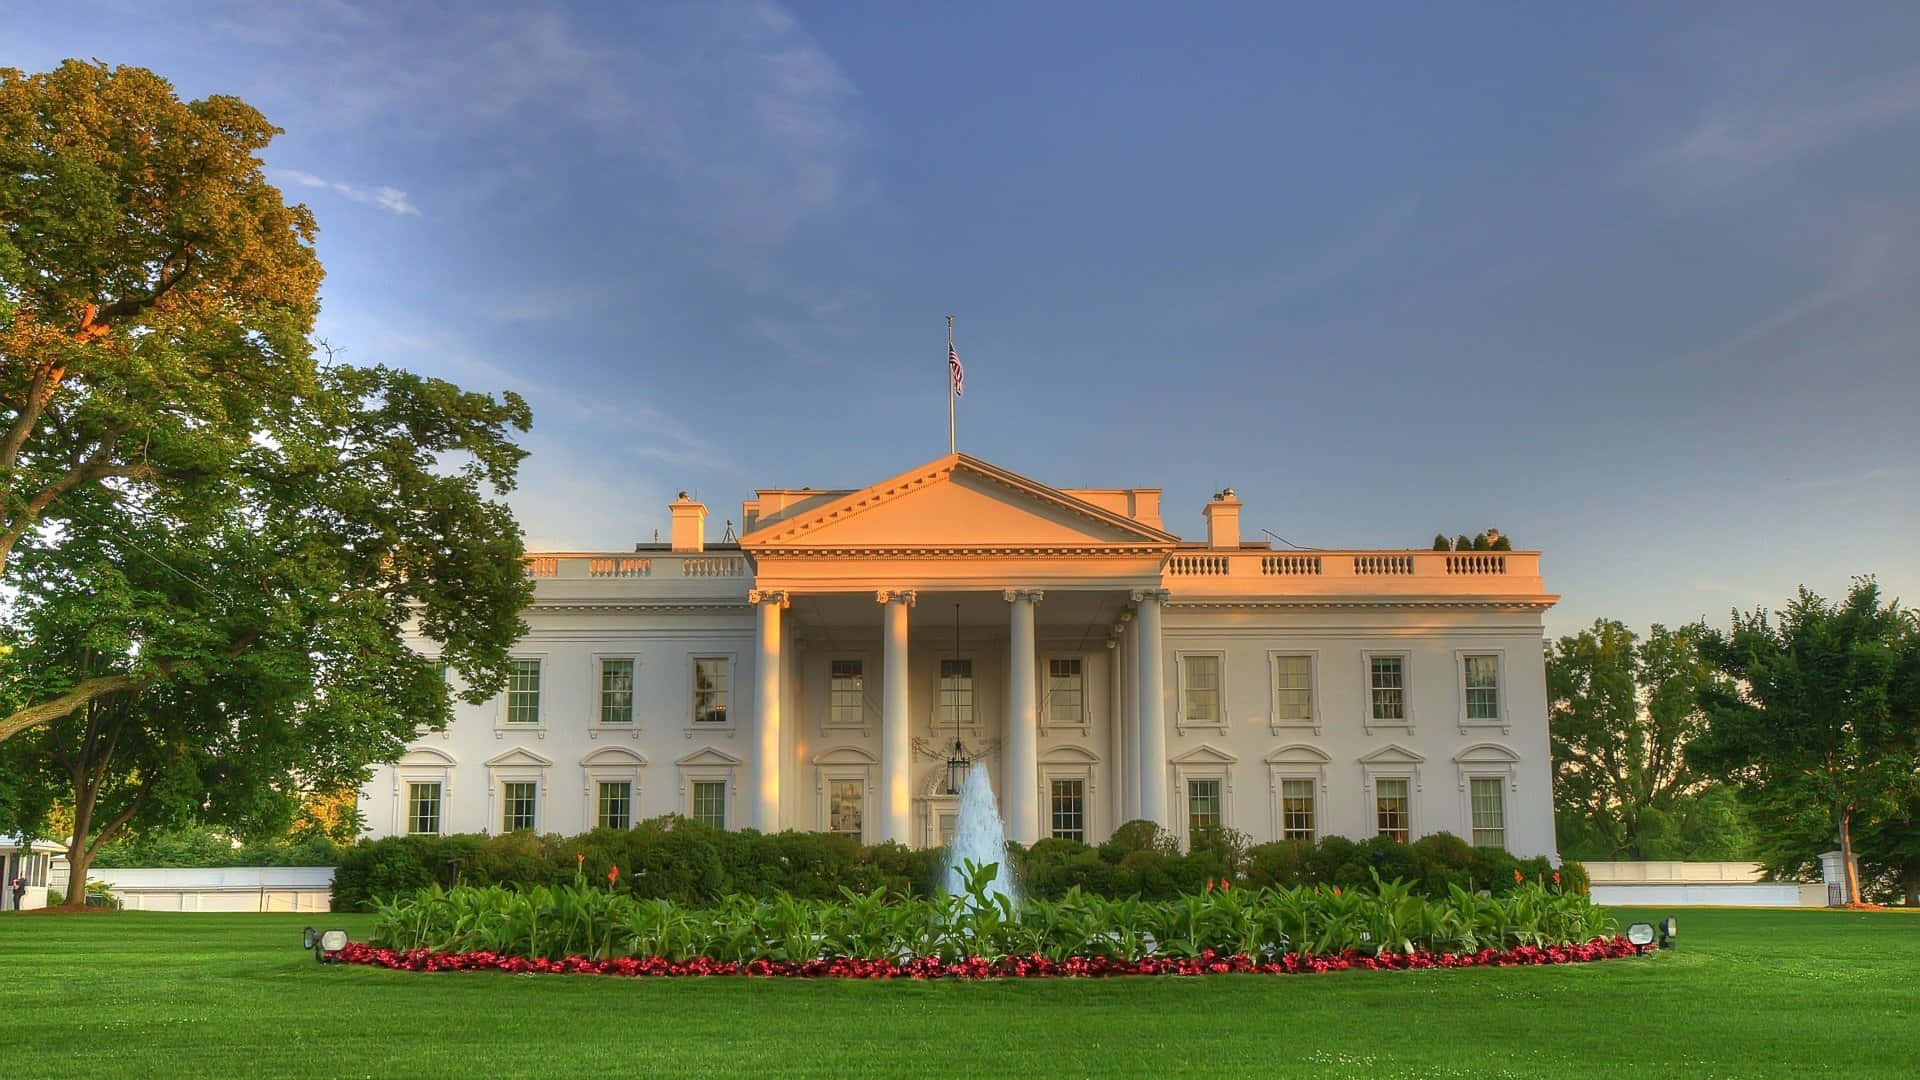 View of the White House from the South Lawn